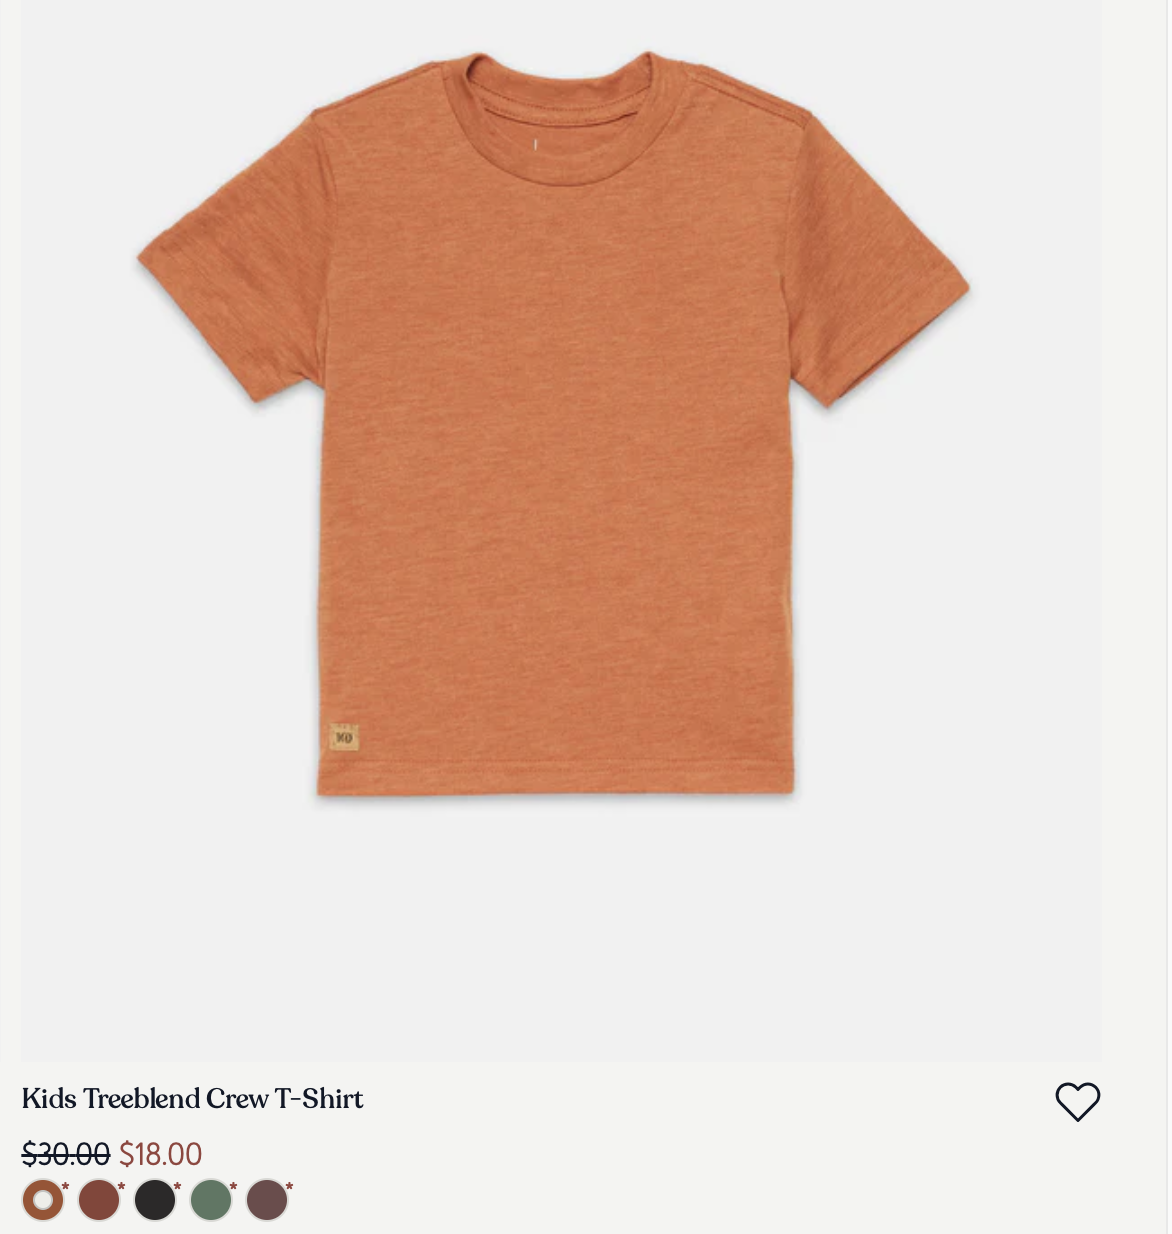 an orange t-shirt with strikethrough price of $30, and current price of $18